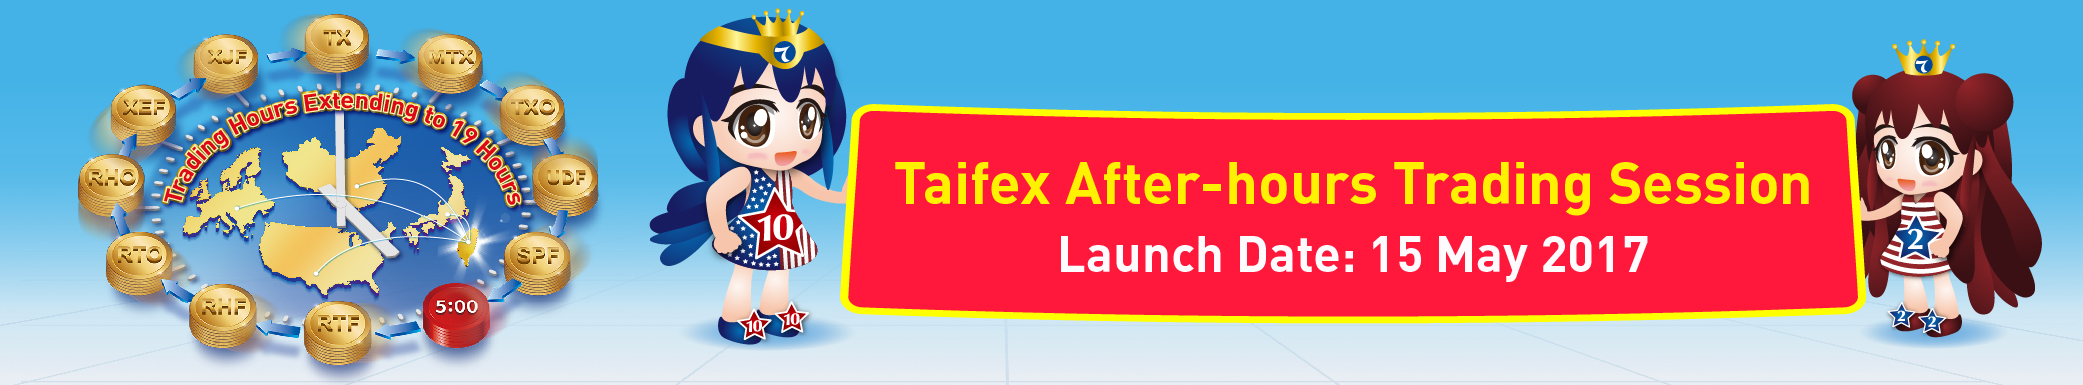 Taifex after-hours trading session